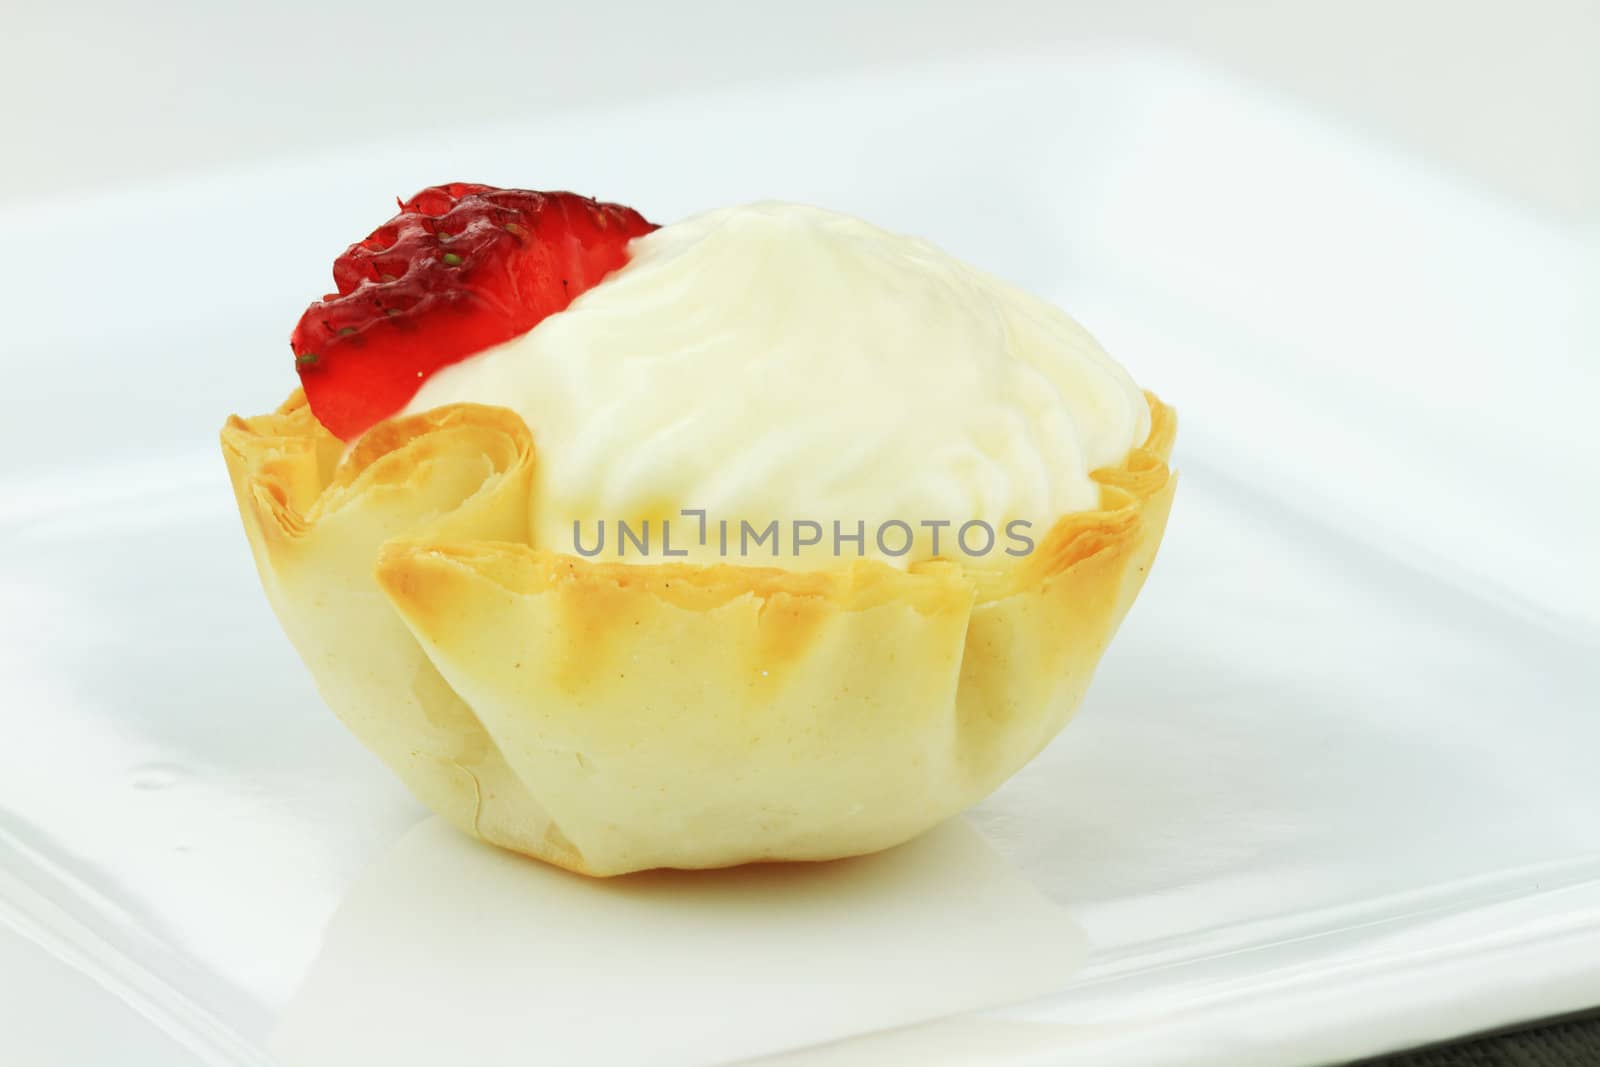 Cream cheese tart with a slice of strawberry.